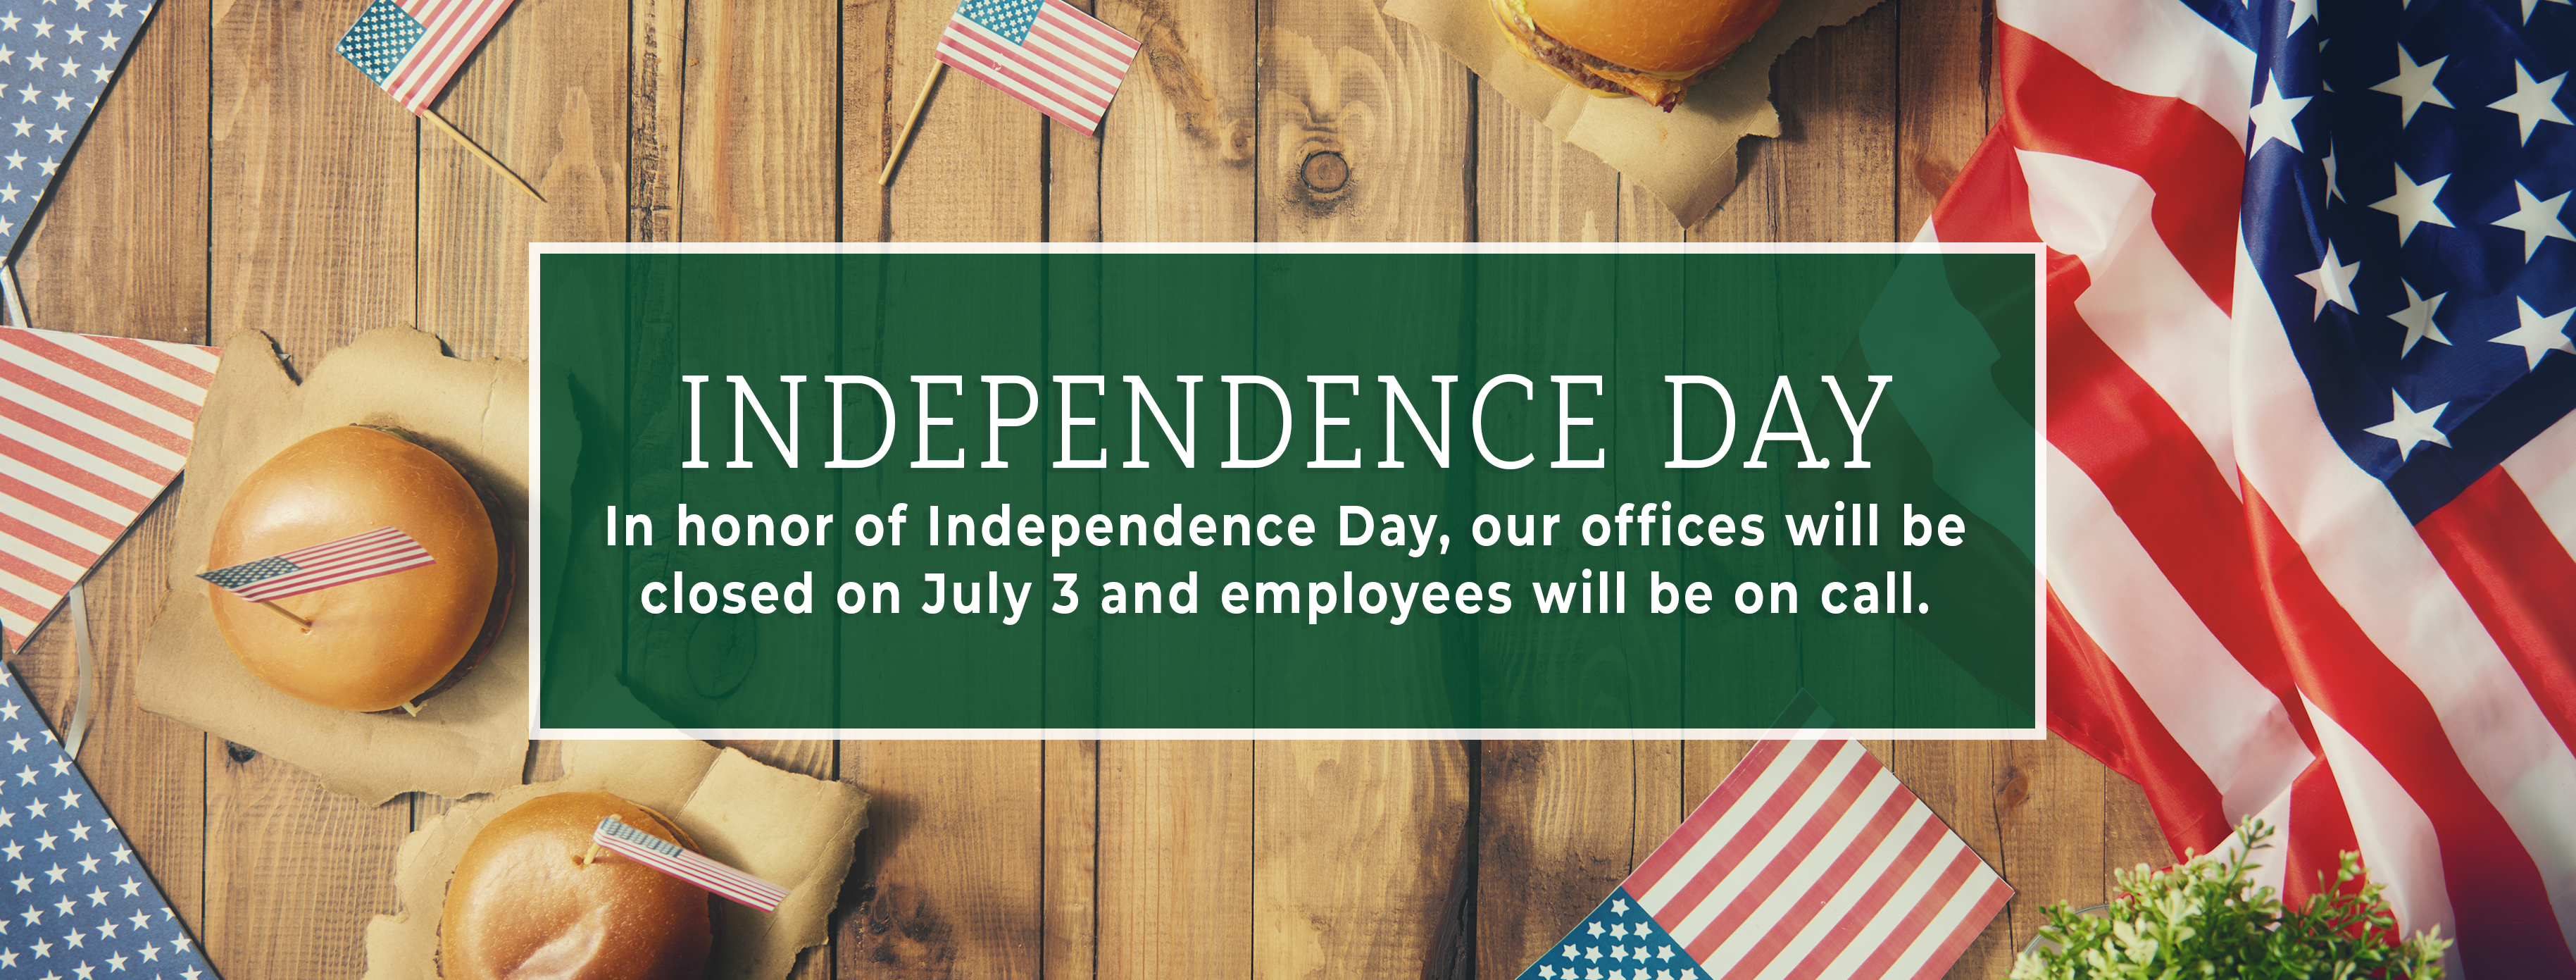 Independence Day. In honor of Independence Day, our offices will be closed on July 3 and employees will be on call. Image of the American flad and picnic table.